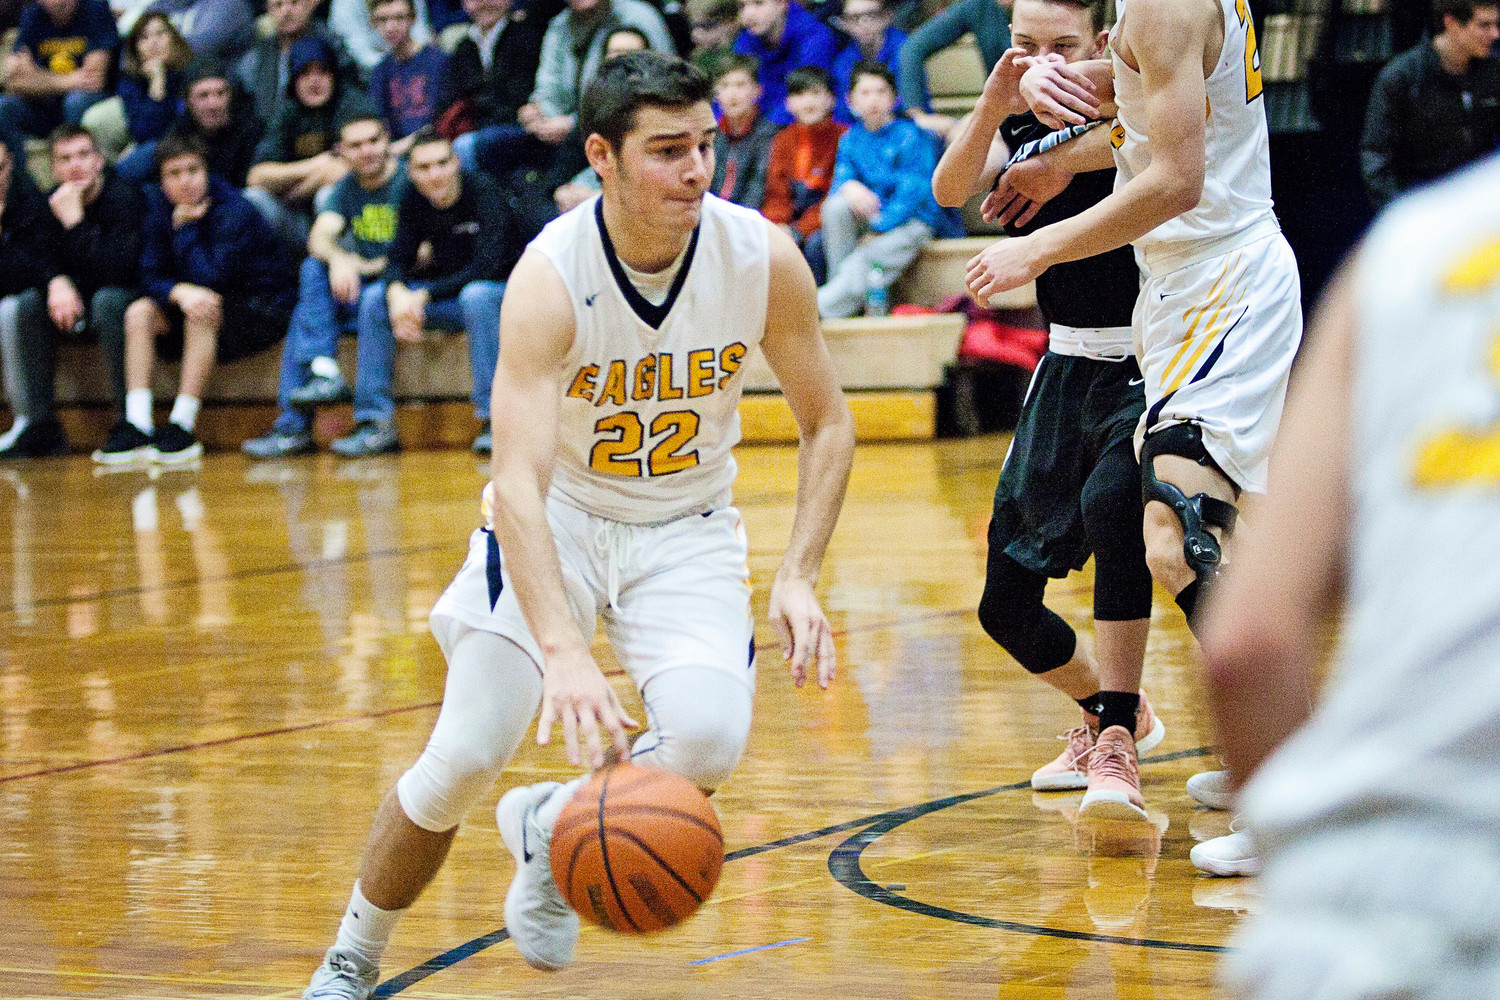 Barrington's Reid Nolan drives toward the basket during the Eagles' game against Holy Name on Wednesday night, Dec. 27.